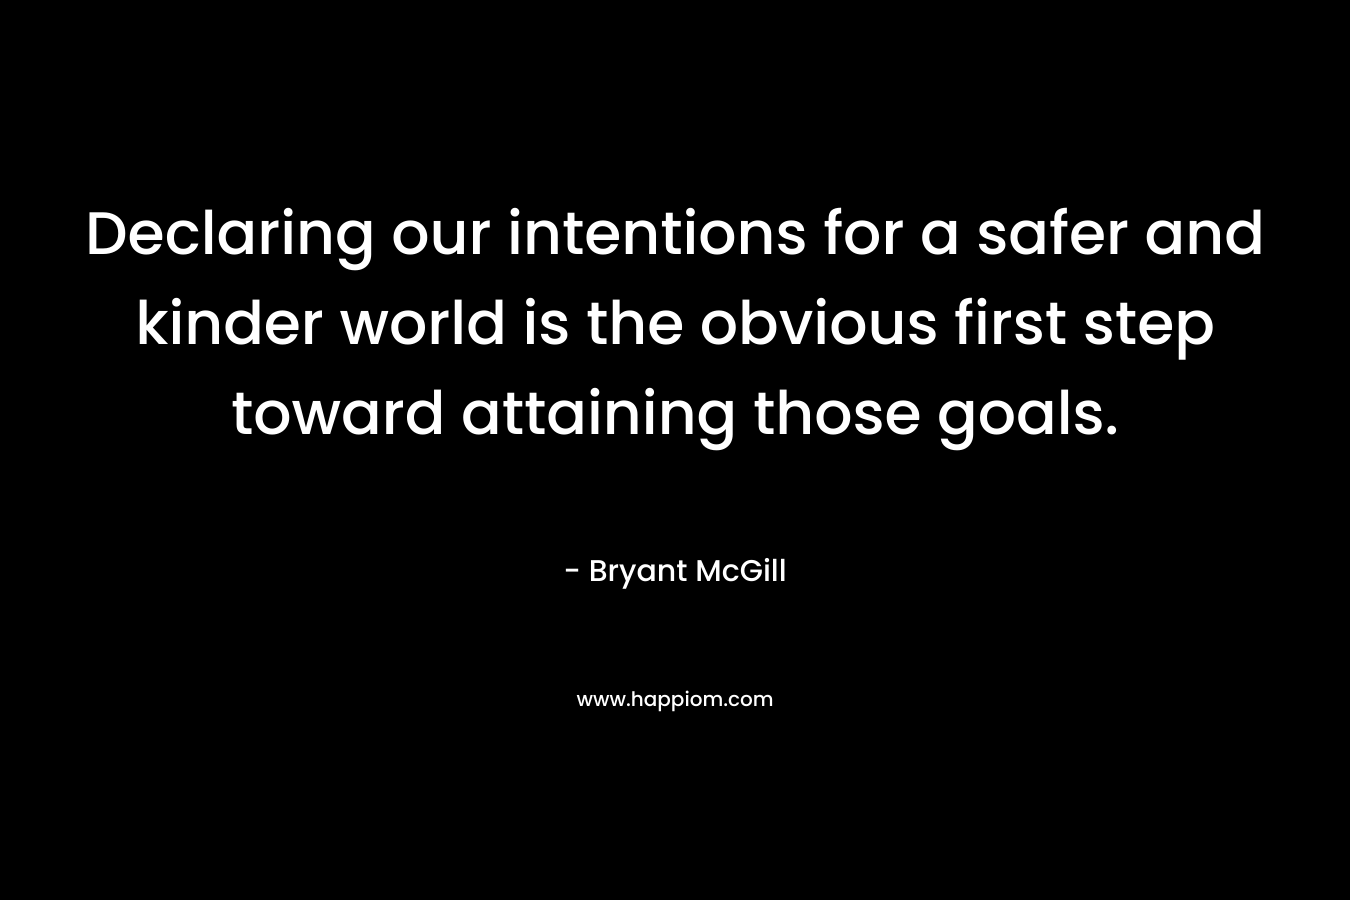 Declaring our intentions for a safer and kinder world is the obvious first step toward attaining those goals.